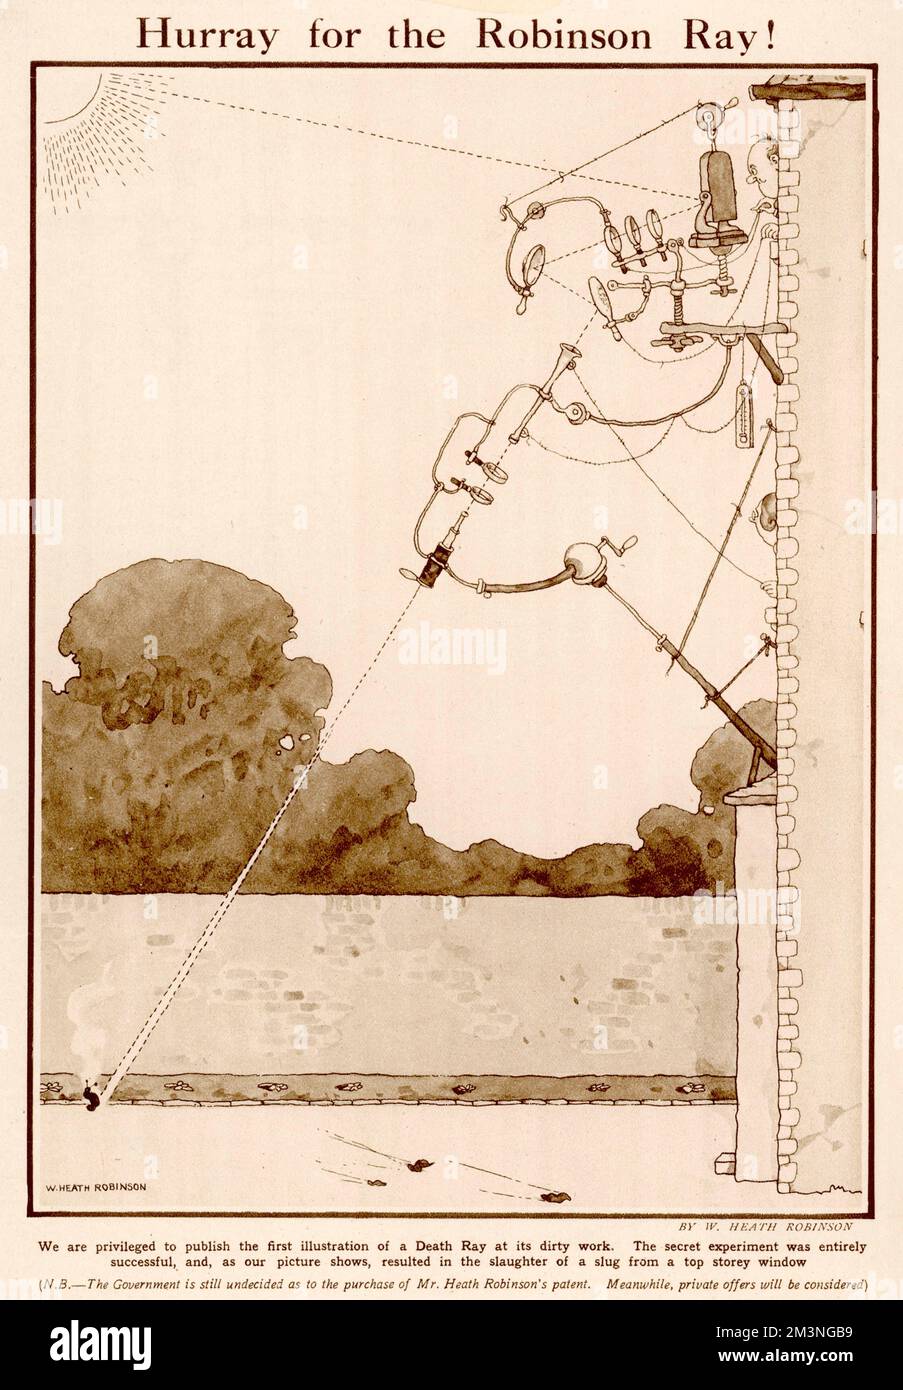 We are privileged to publish the first illustration of a Death Ray at it's dirty work. the top secret experiment was entirely successful, and as our picture shows, resulted in the slaughter of a slug from a top storey window. Please note: Credit must appear as  Courtesy of the estate of Mrs J.C.Robinson/Pollinger Ltd/ILN/Mary Evans     Date: 11th June 1924 Stock Photo